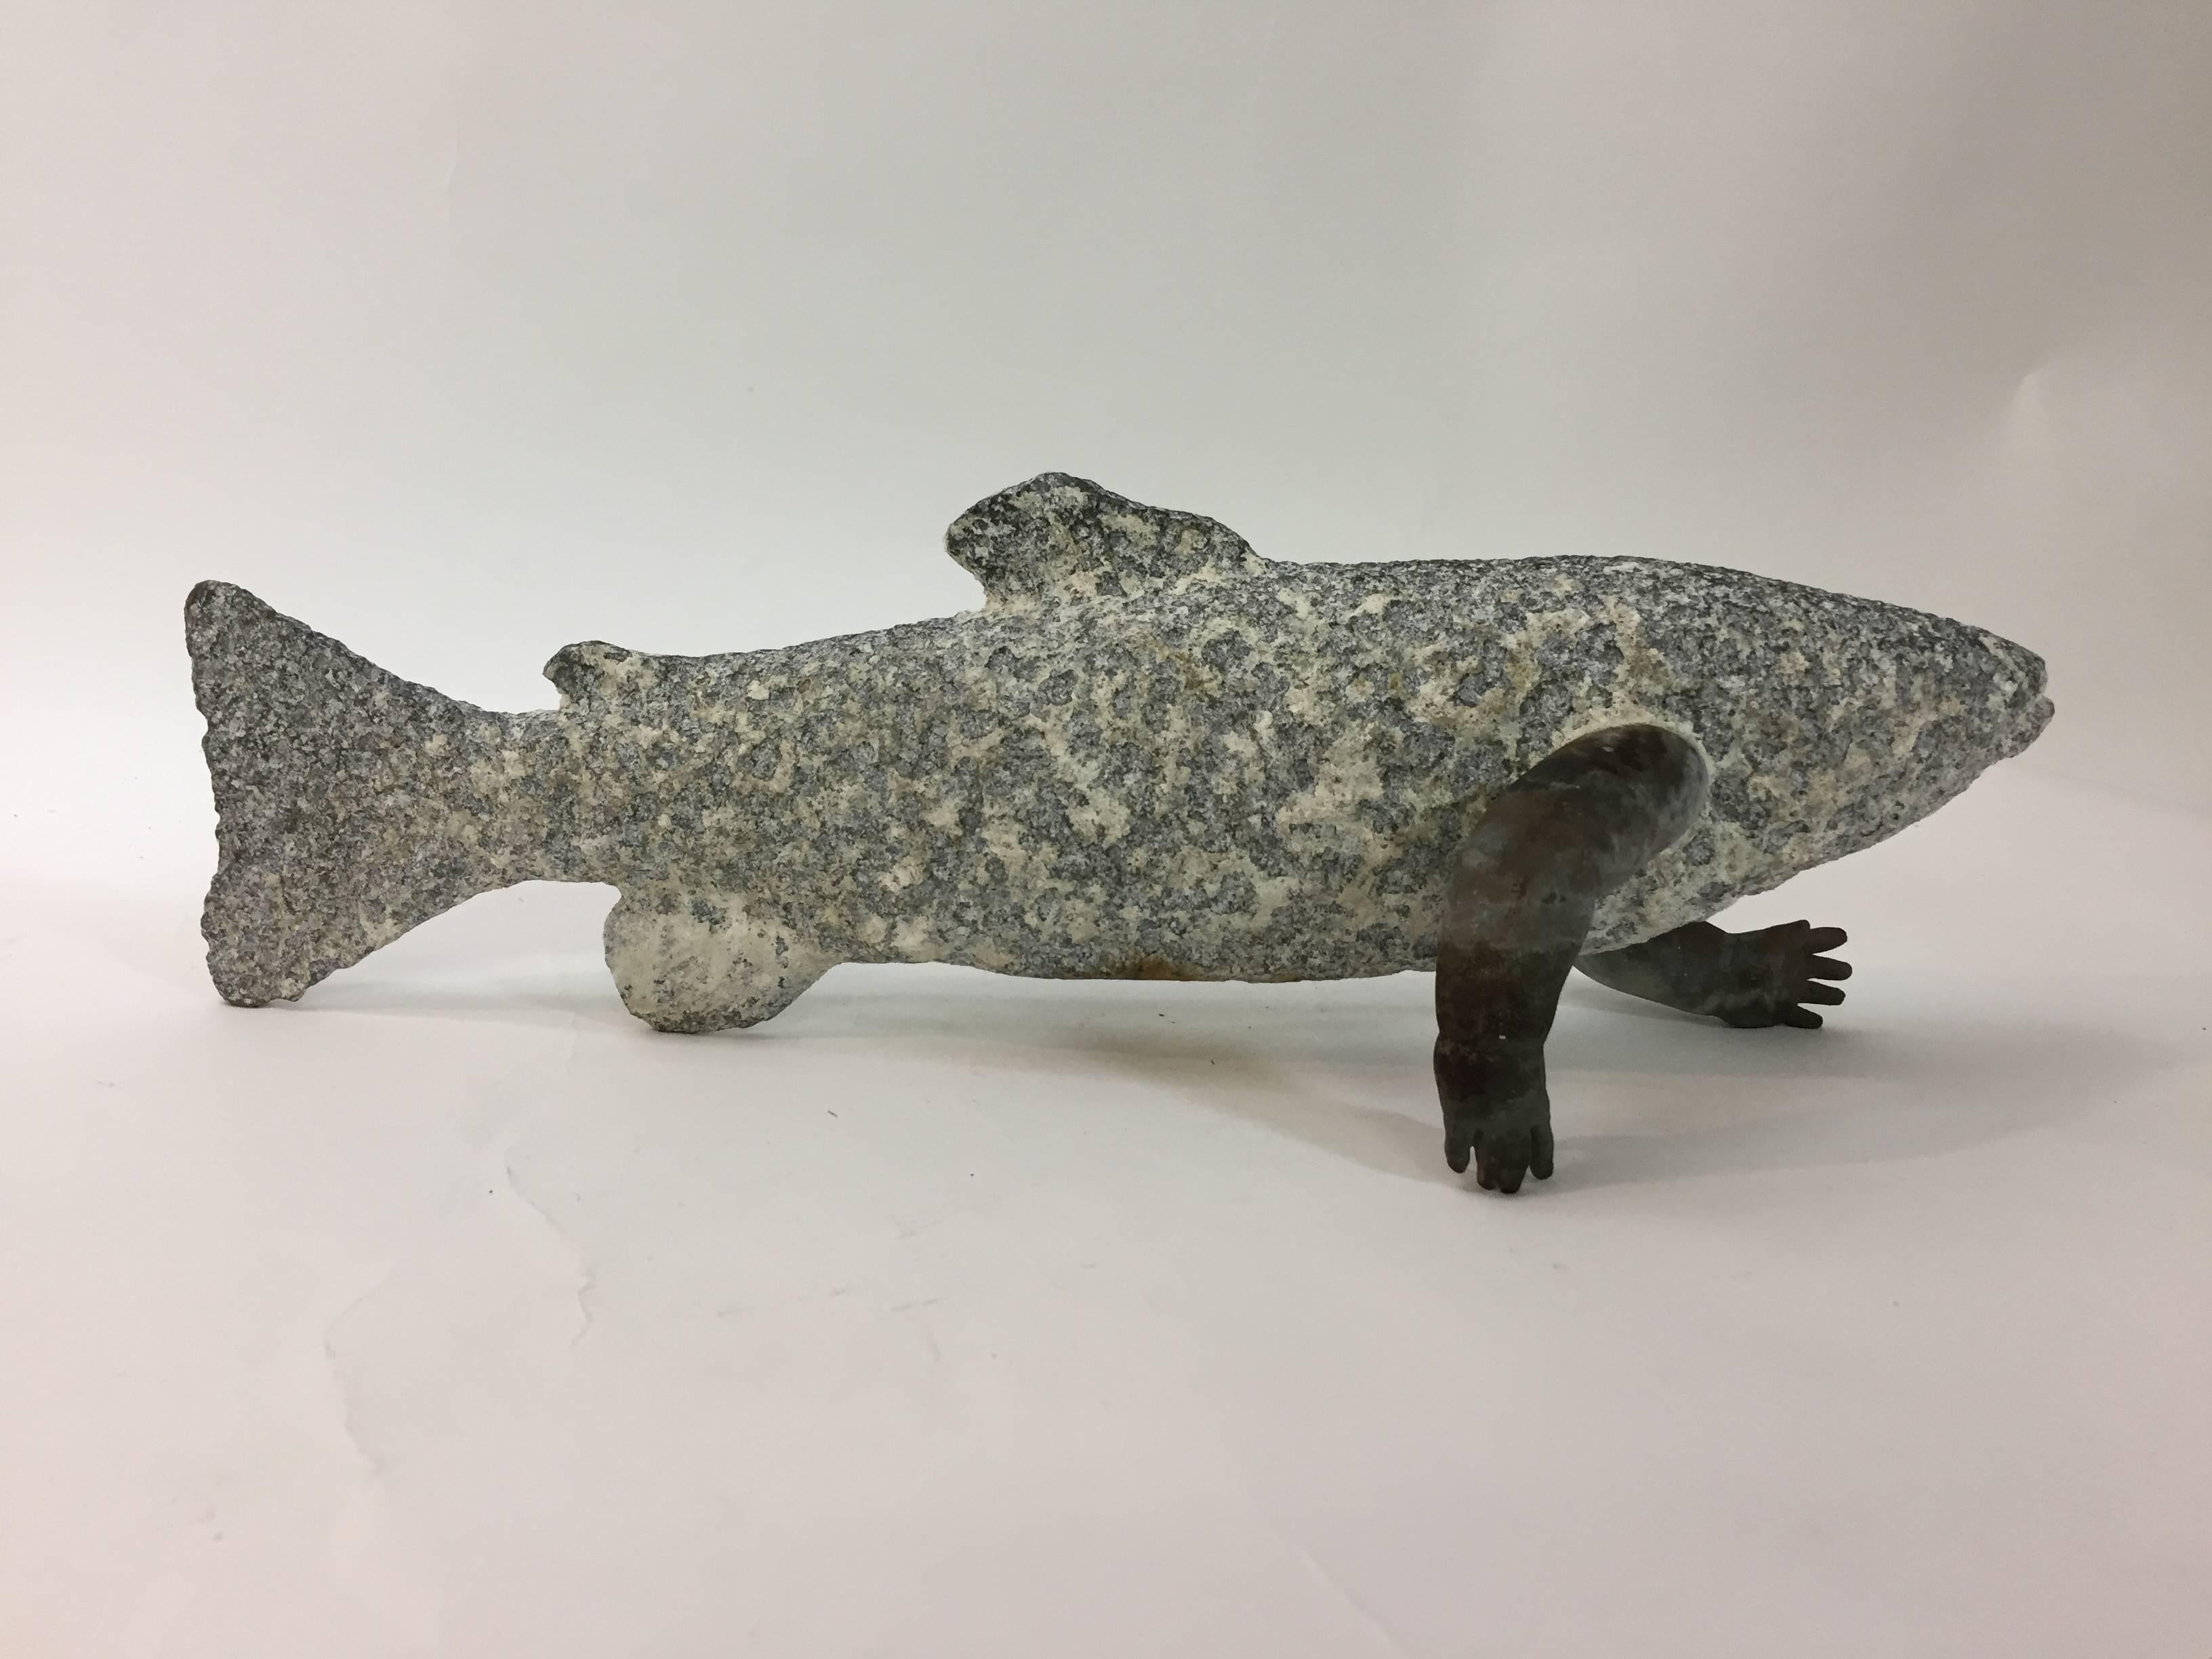 A complete oddity. This fish sculpture is signed and dated, Maxon, 1995. There are some other illegible markings on the arms of the fish. Constructed from a carved stone and what appears to be cast bronze arms.